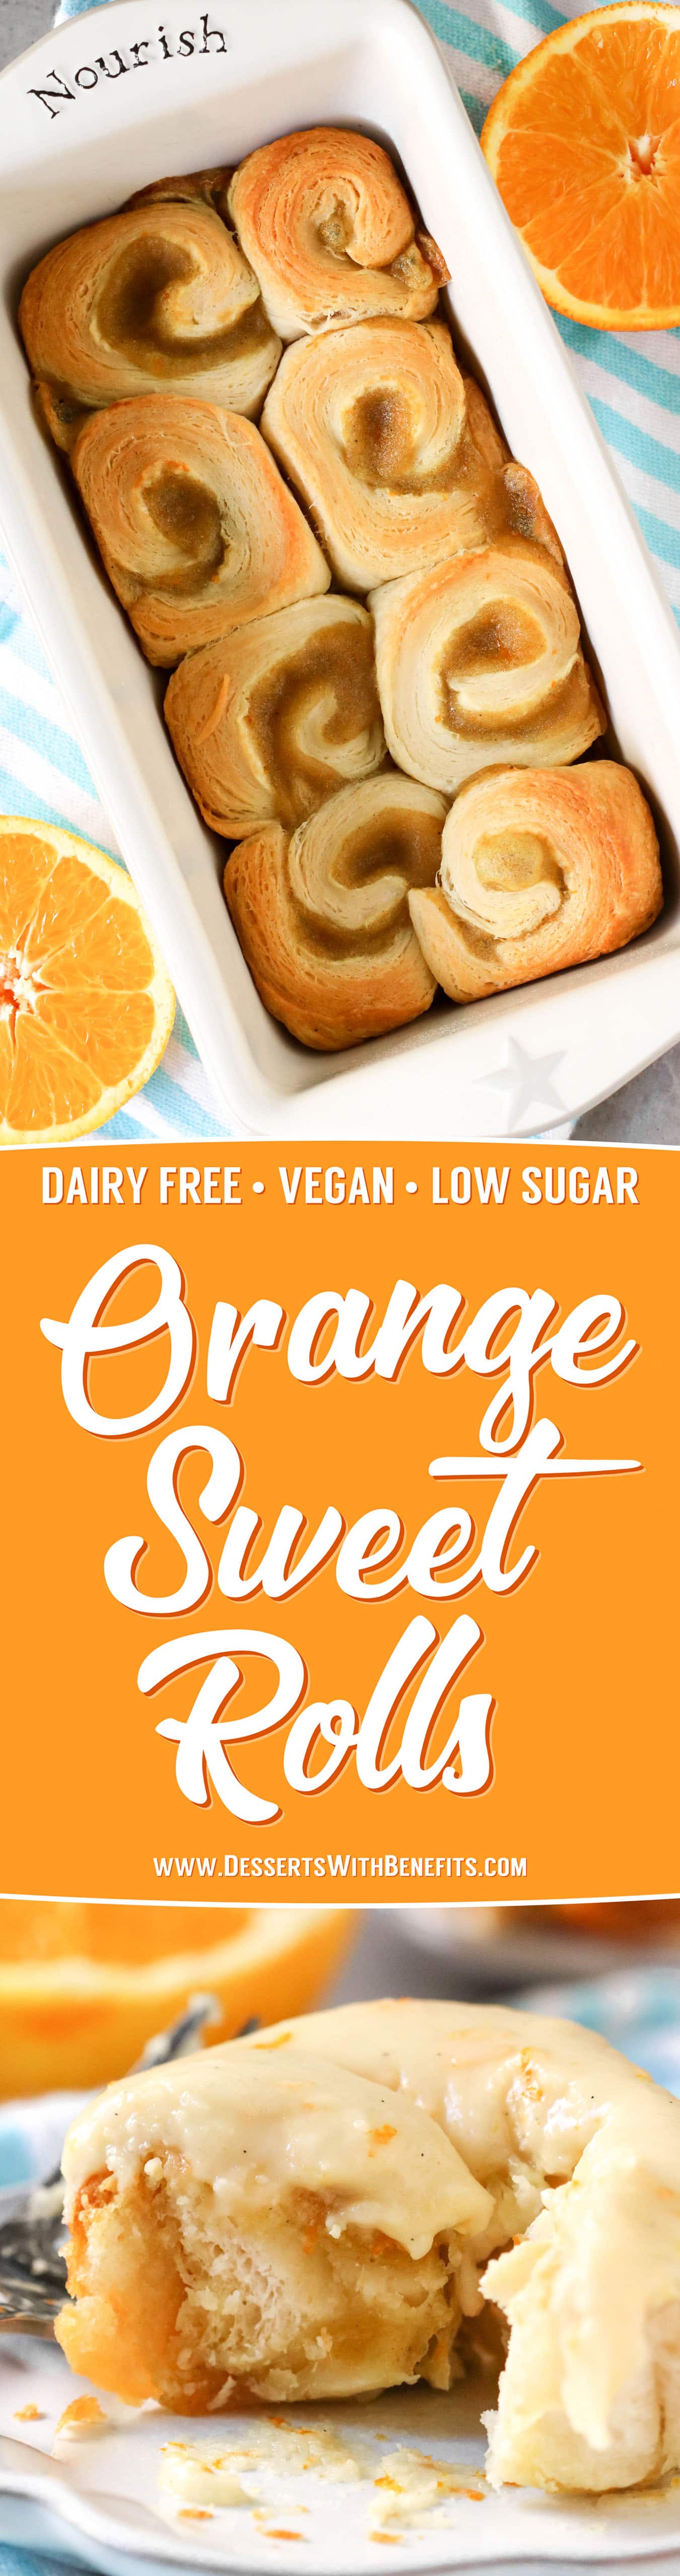 These easy five ingredient Orange Sweet Rolls are so soft, sweet, and fluffy, you'd never know they're low fat, dairy free, and vegan with no sugar added!